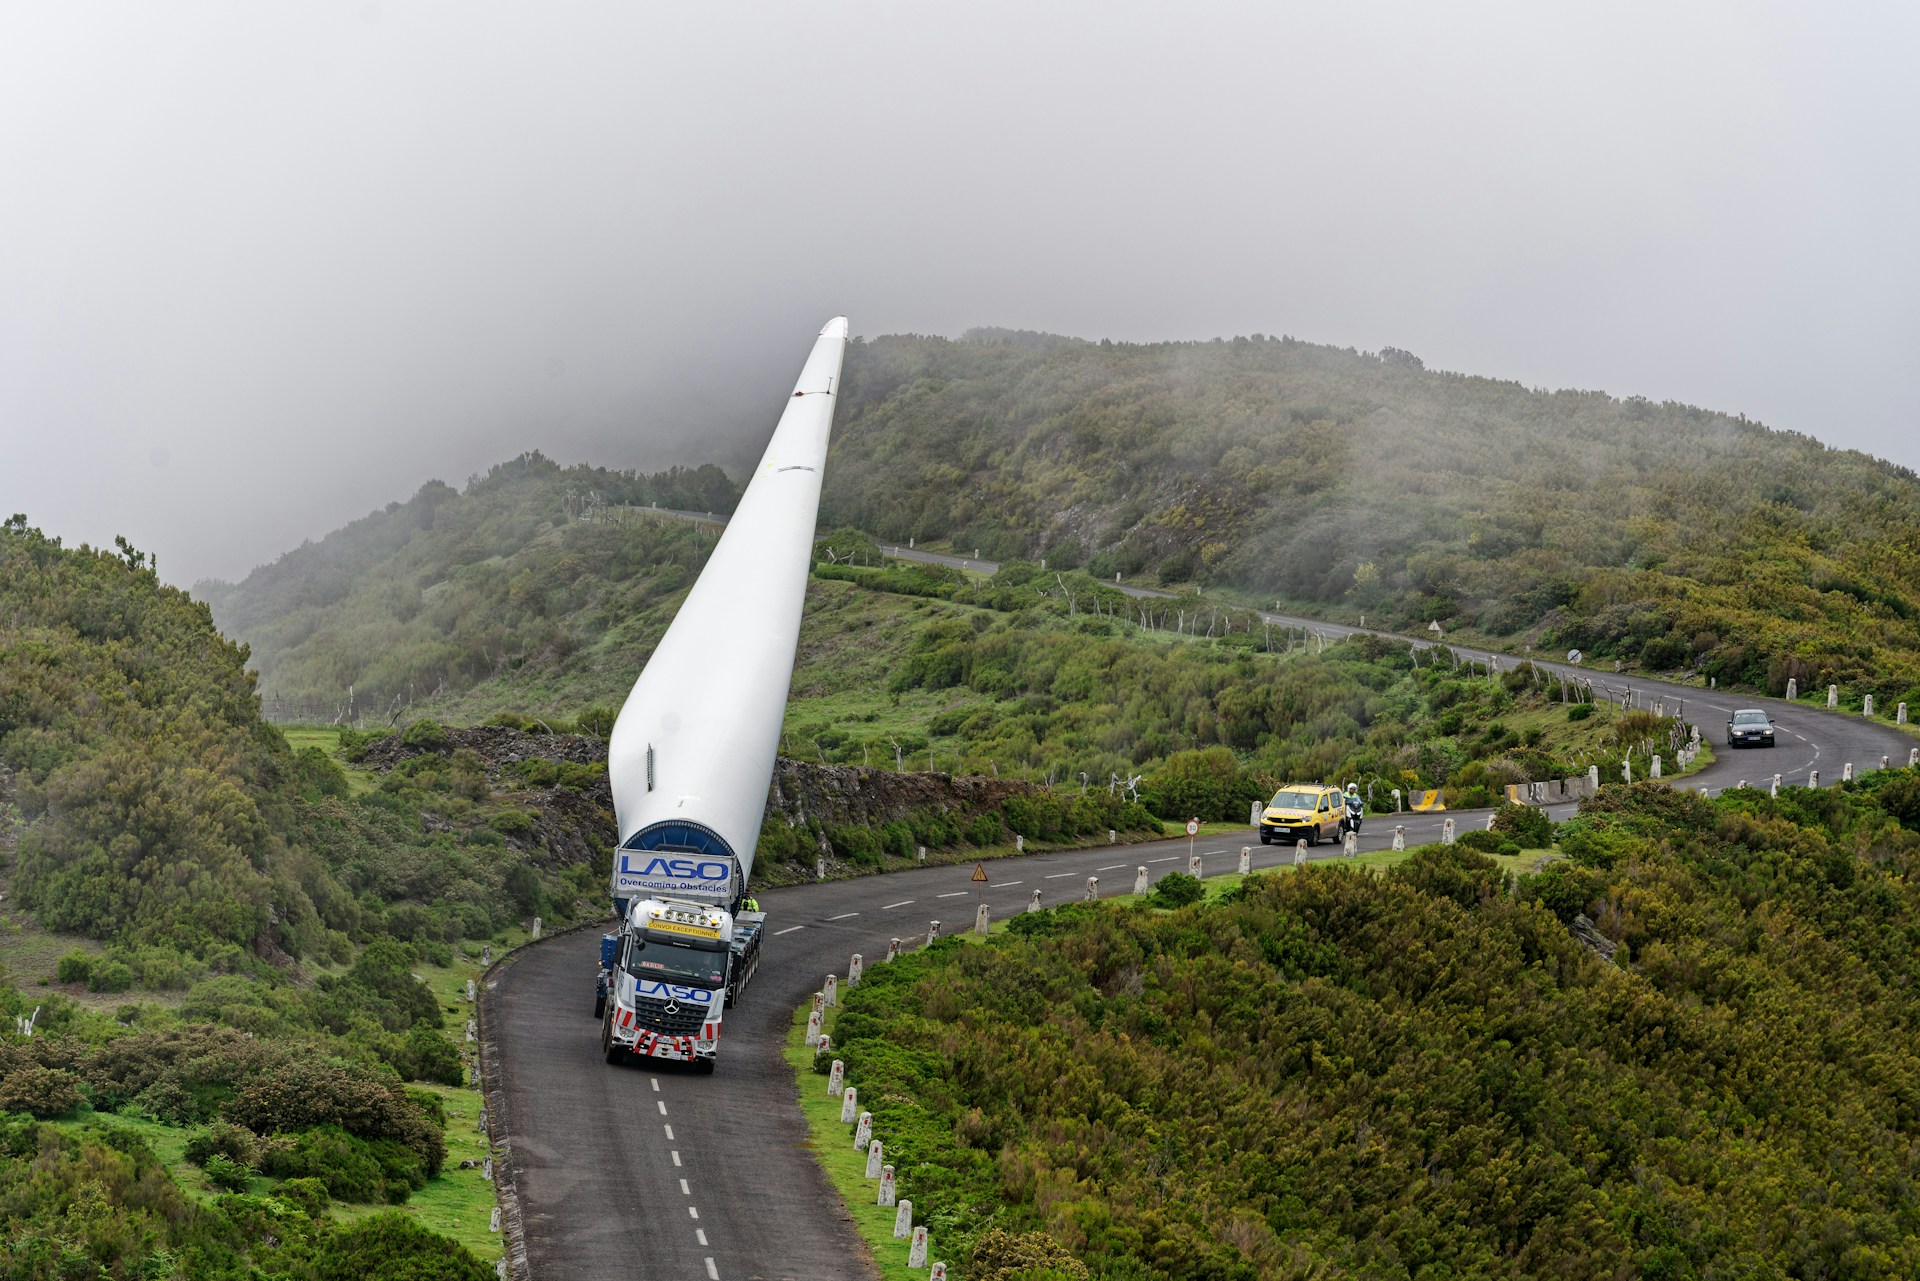 wind turbine transported by a truck